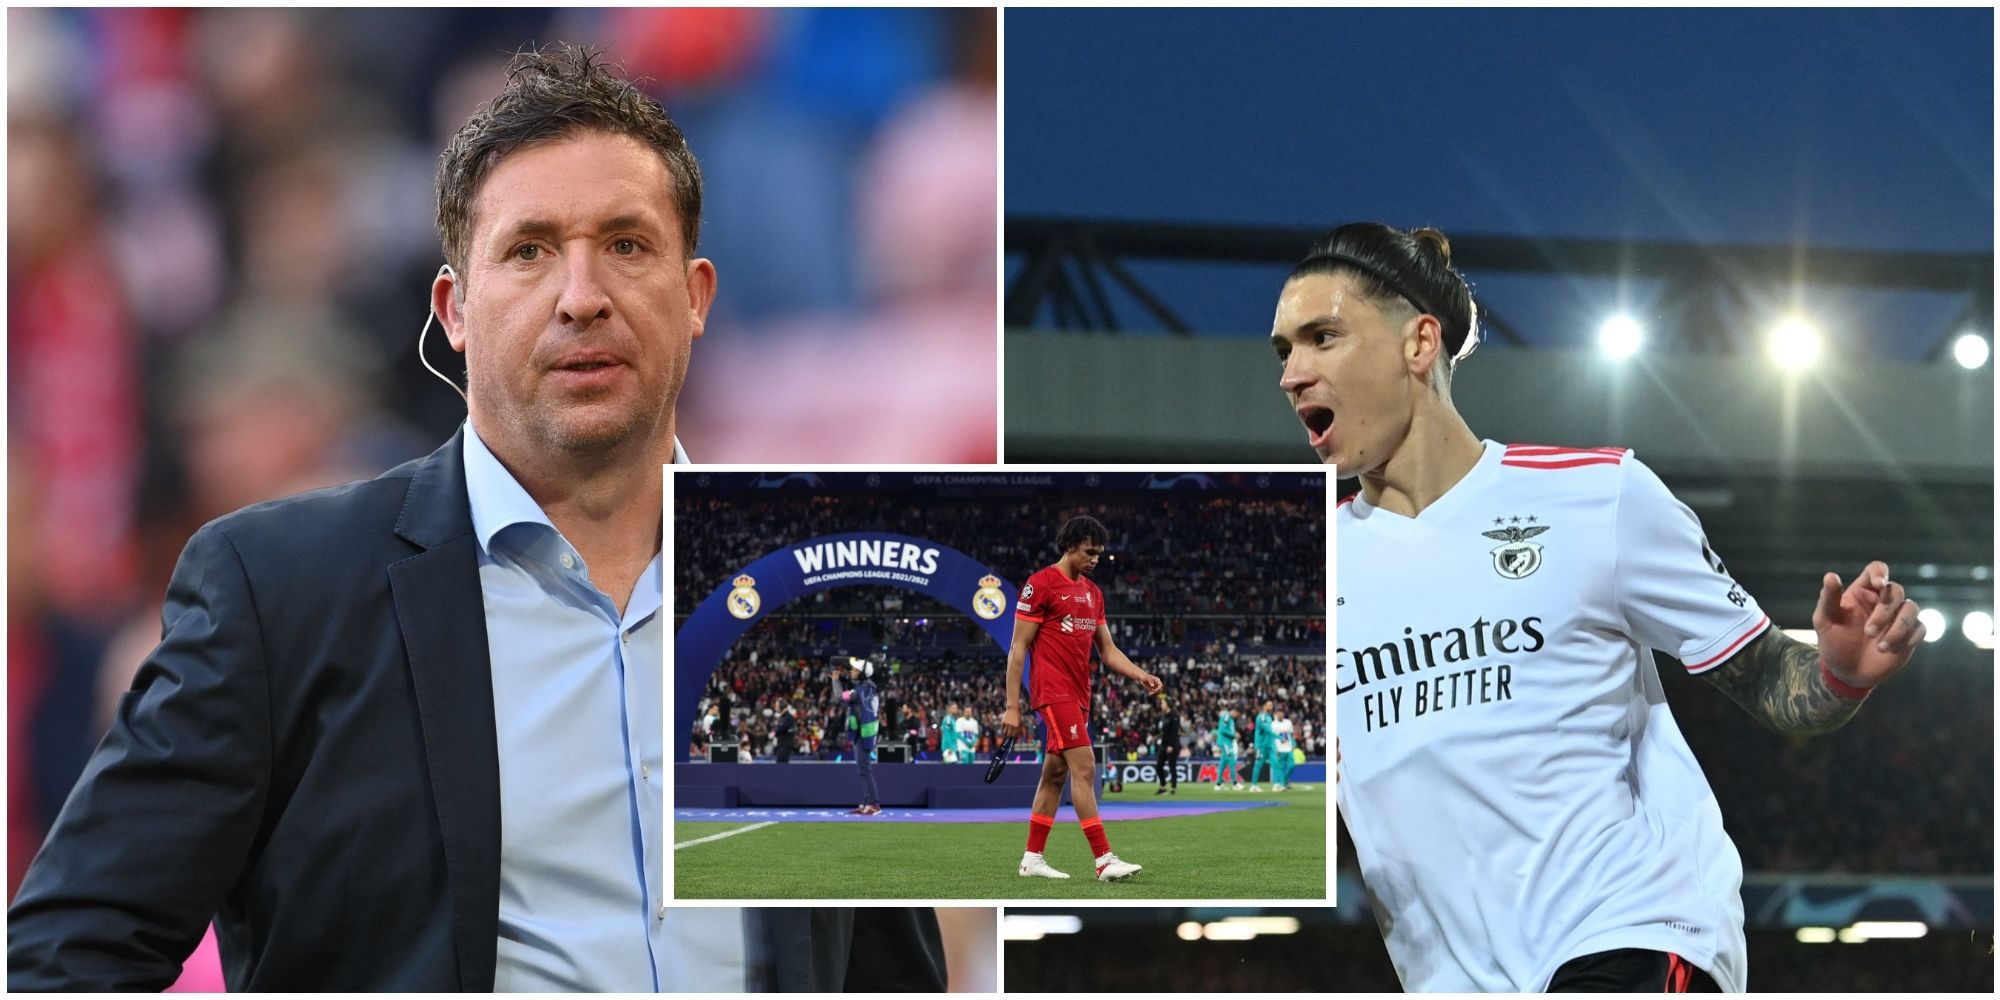 Fowler suggests Liverpool could have won CL final if they’d bought ‘really exciting’ attacker before Paris trip